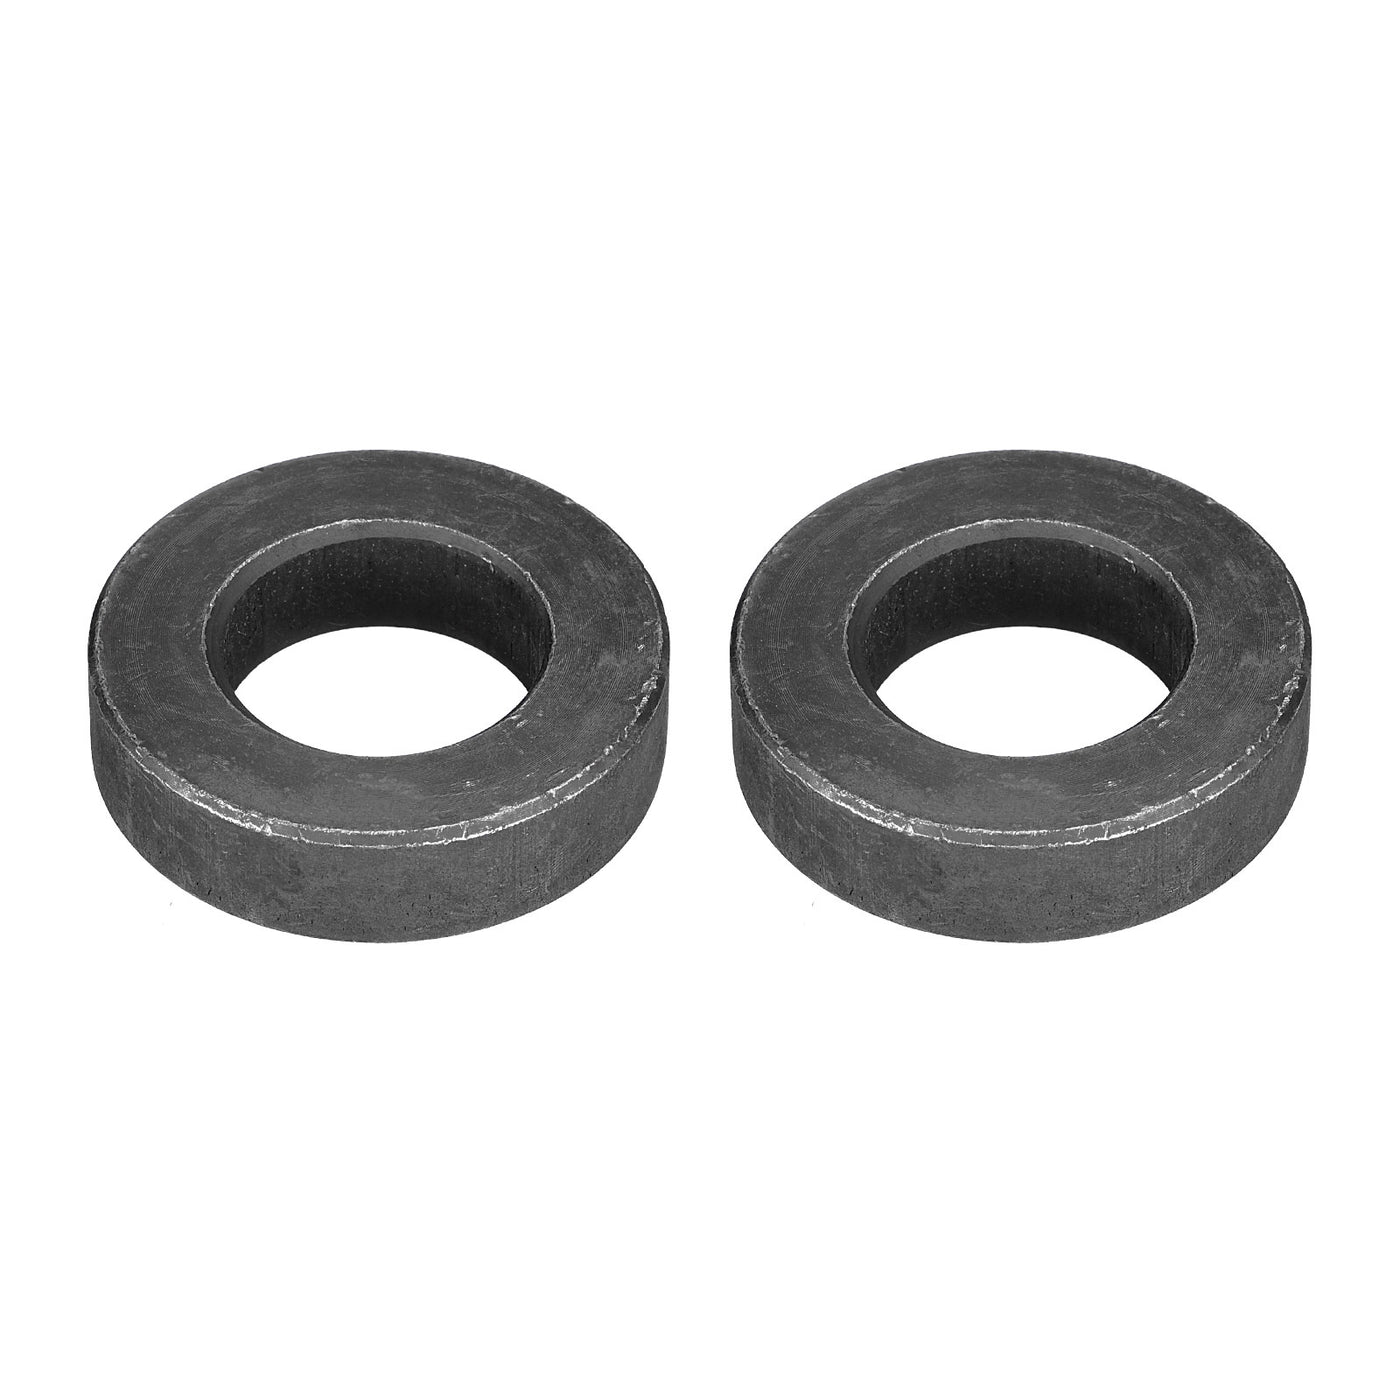 uxcell Uxcell M24 Carbon Steel Flat Washer 2pcs 25x49x11mm Grade 8.8 Alloy Steel Fasteners